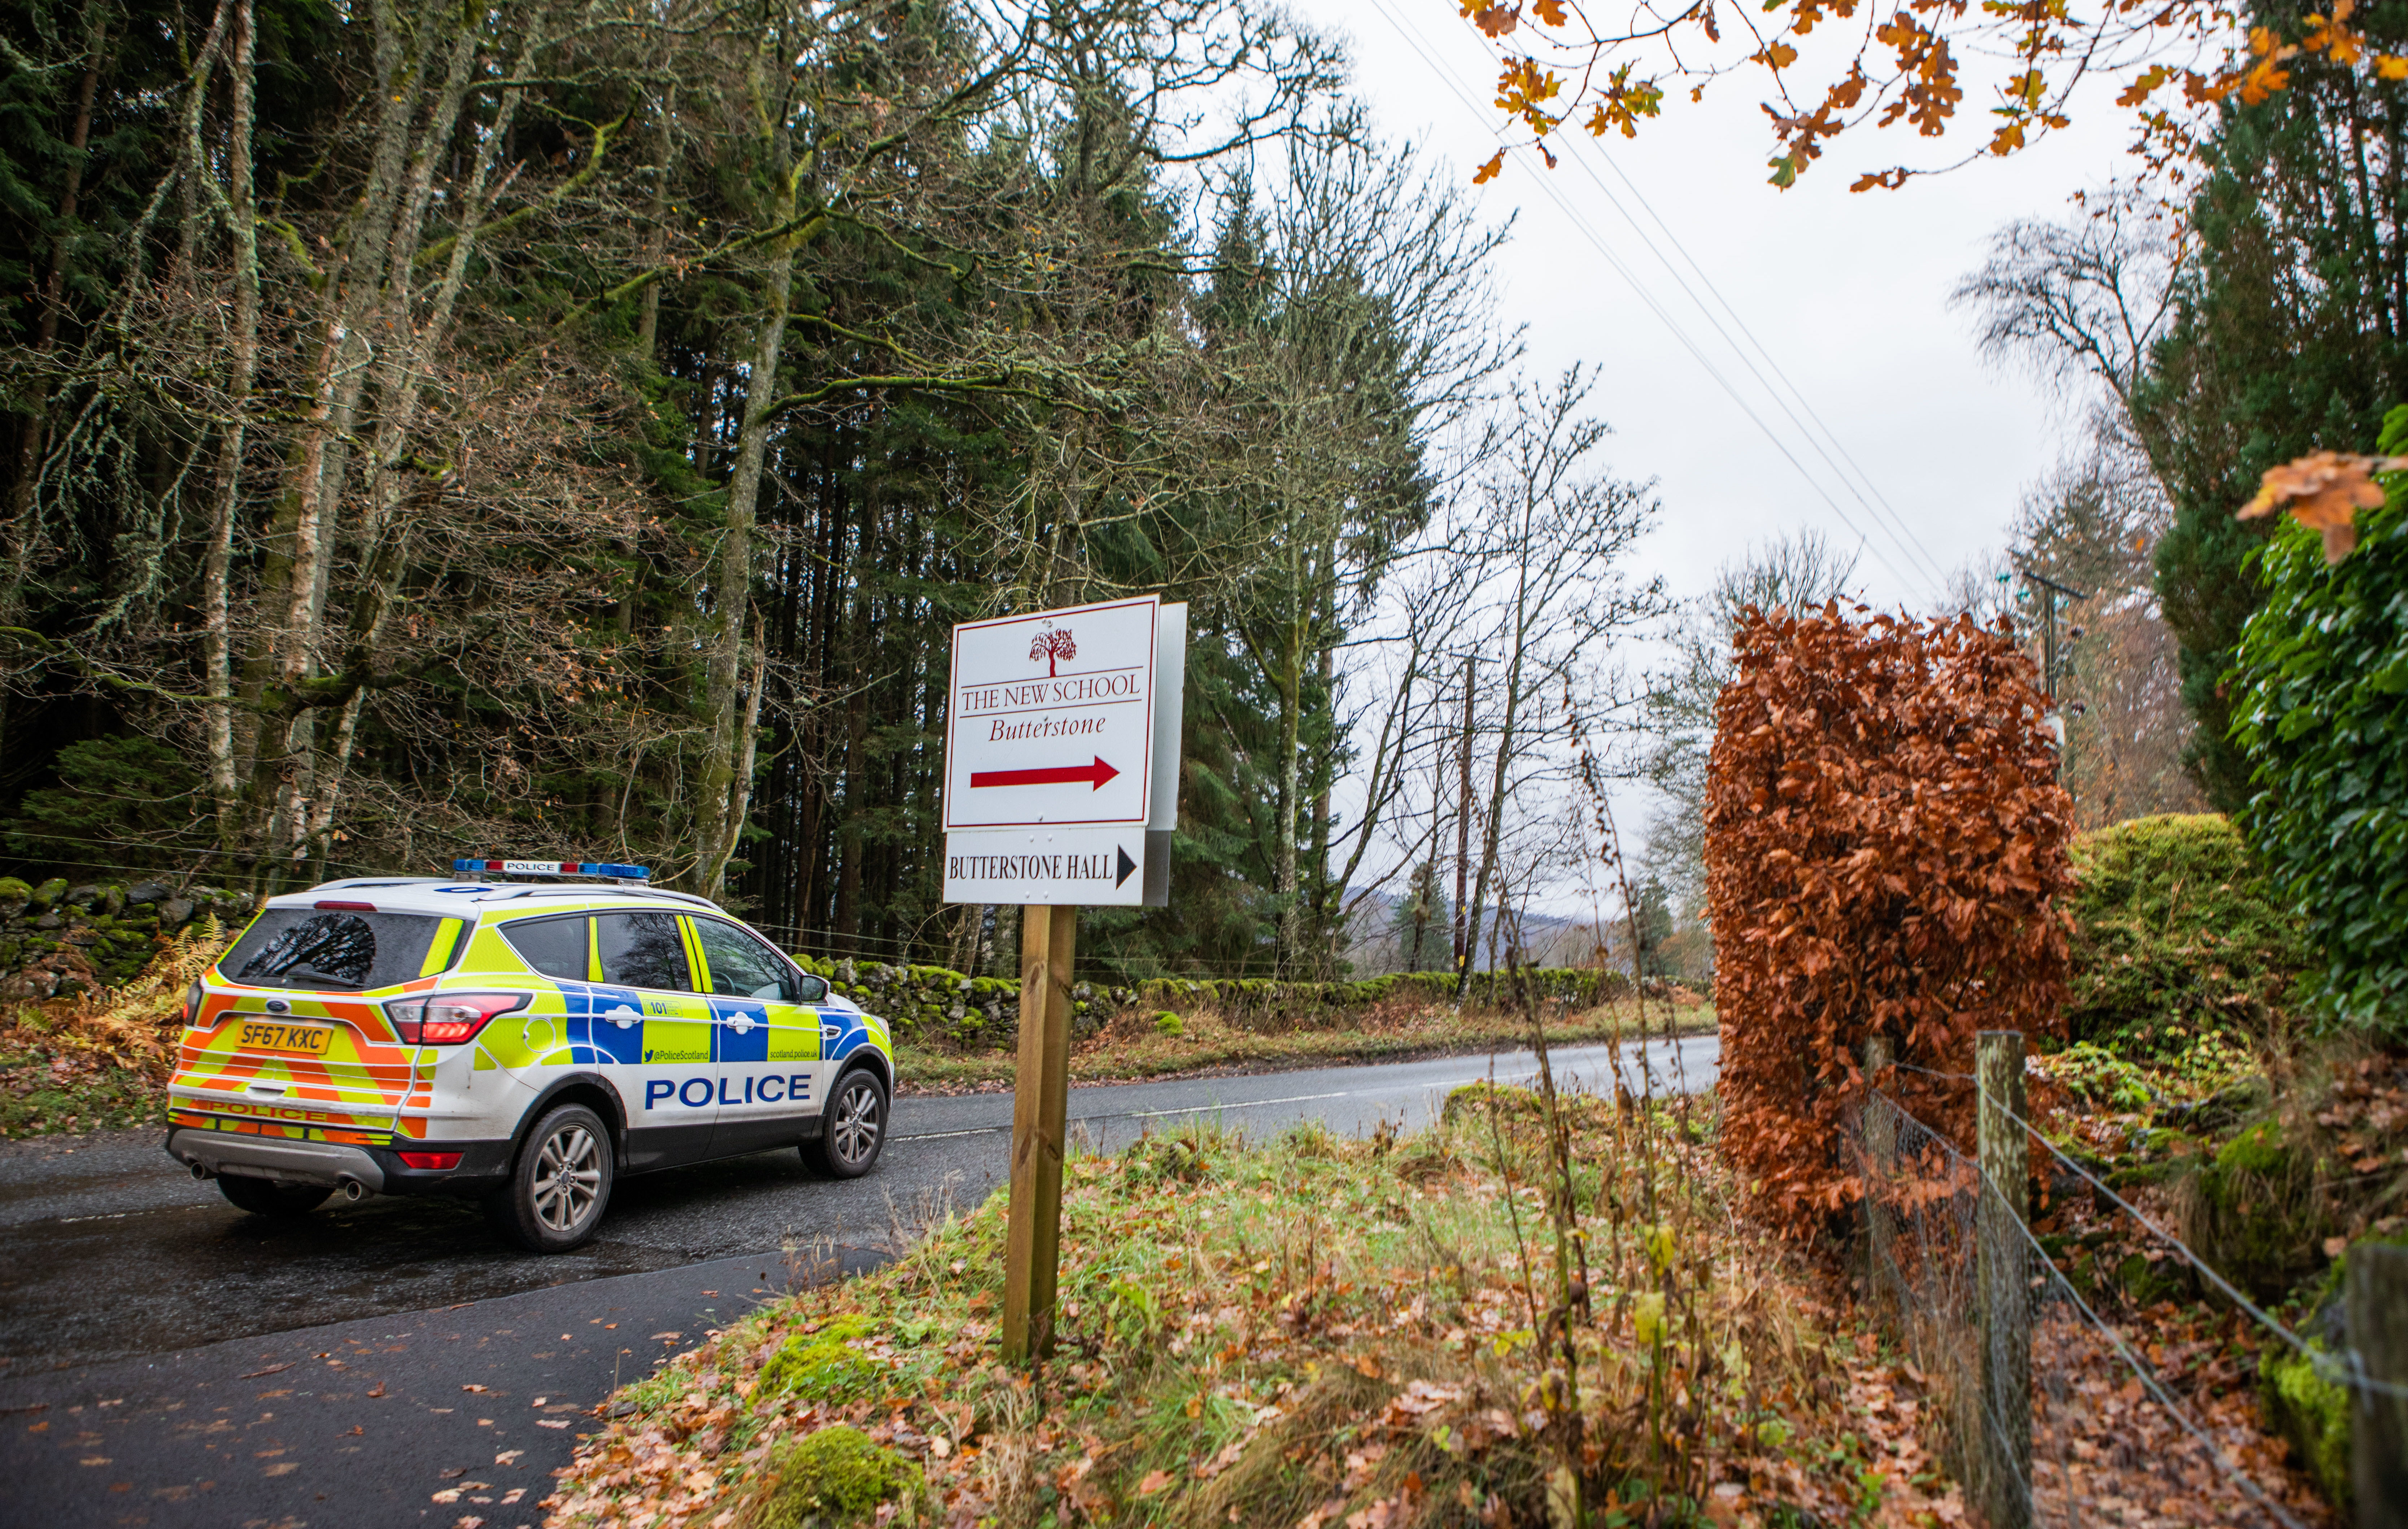 Two police vehicles were sent to the school site on the day Butterstone closed